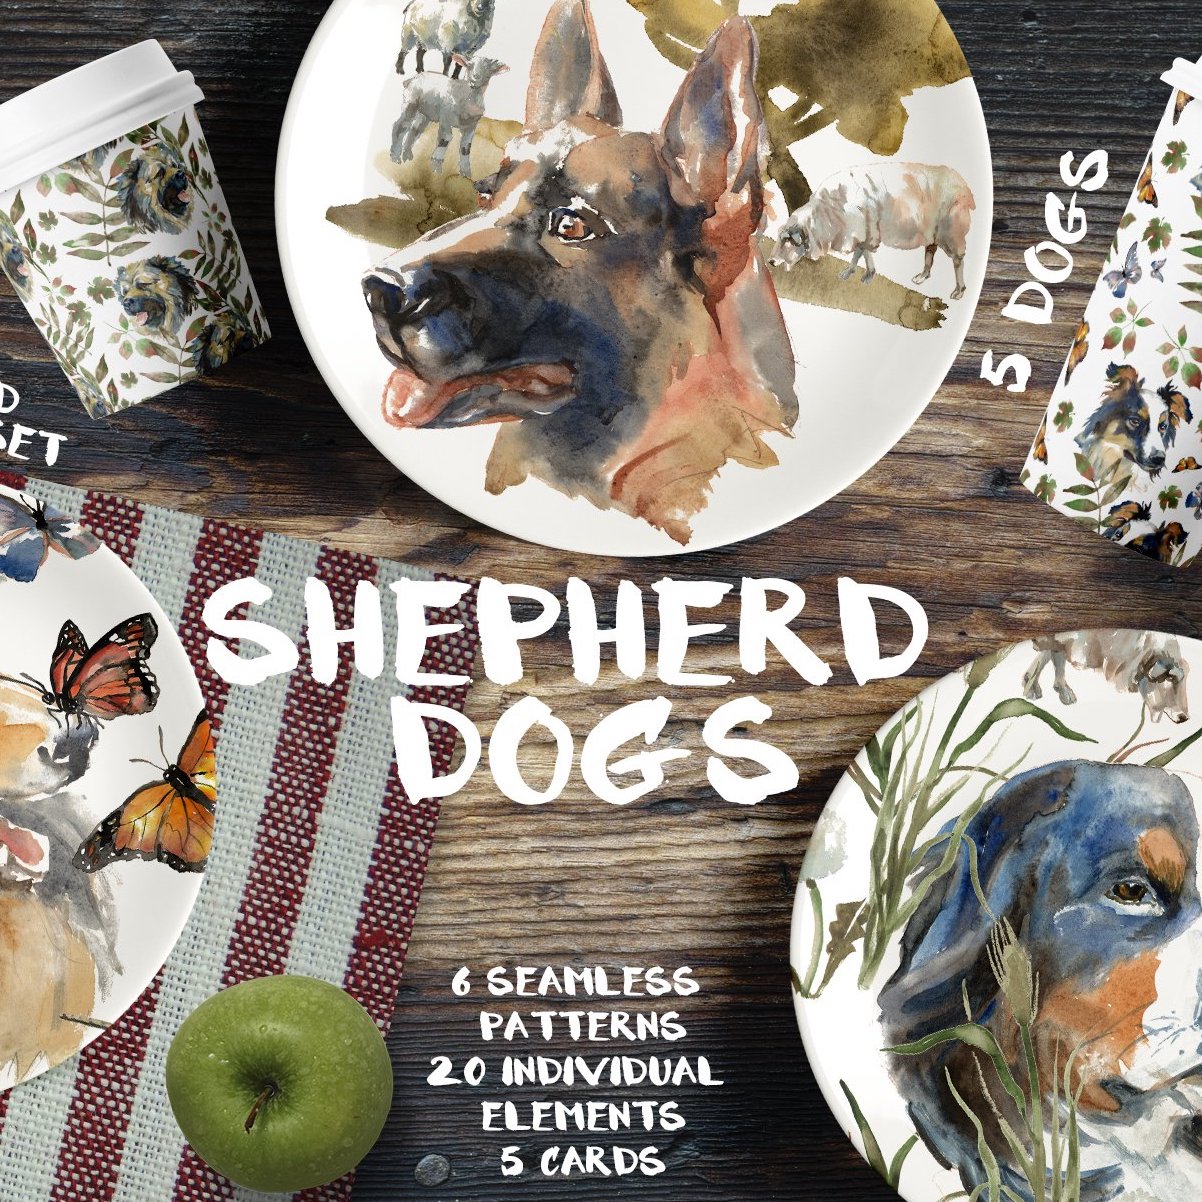 Shepherd Dogs Watercolor Set cover image.